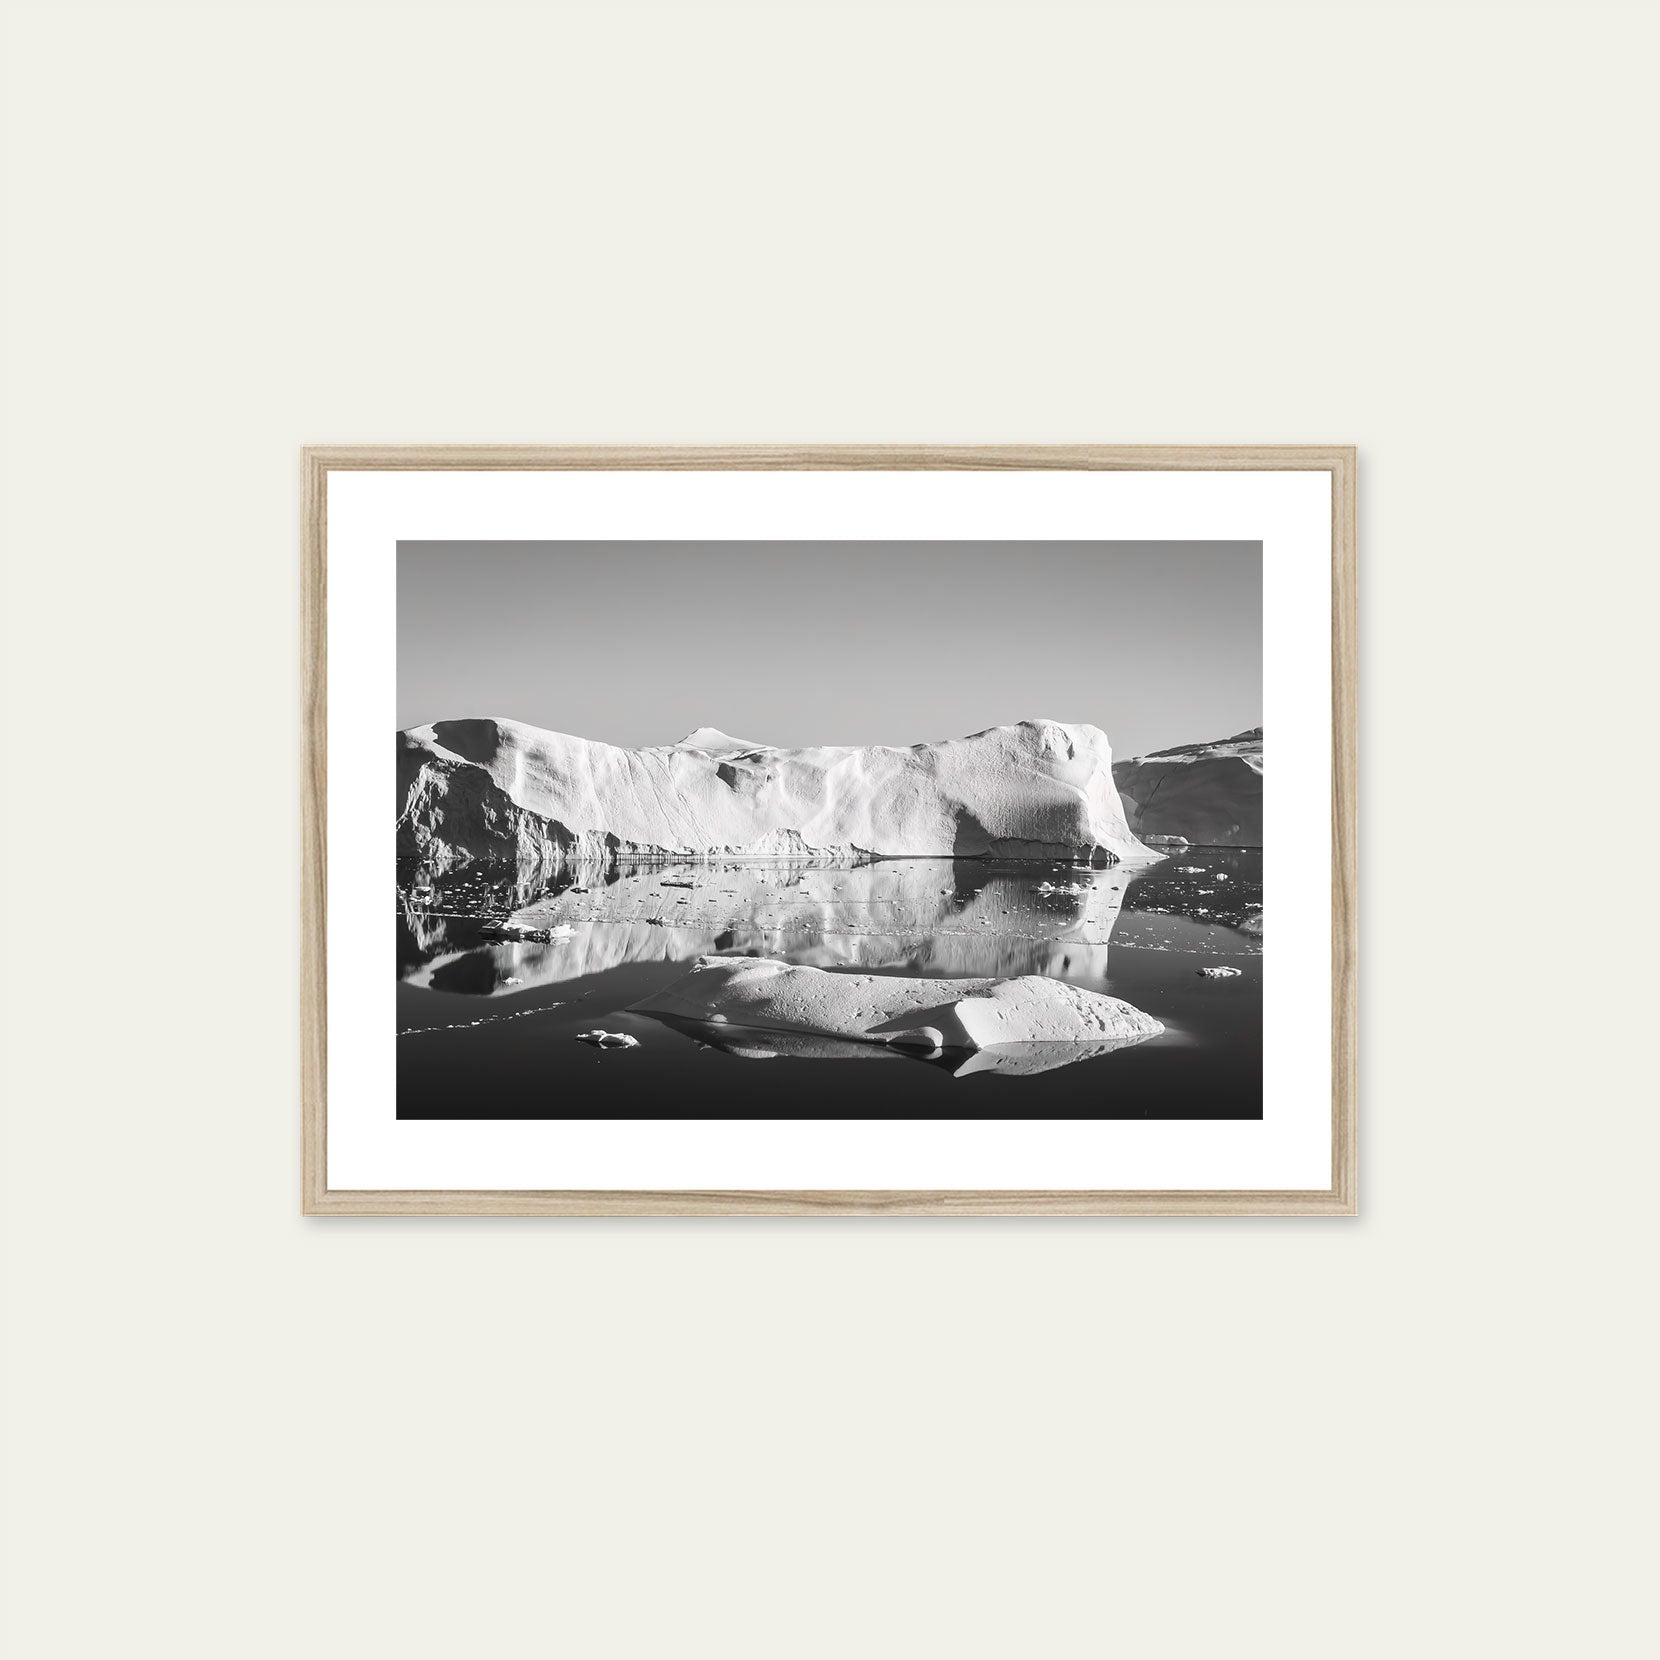 A wood framed black and white print of icebergs in Greenland